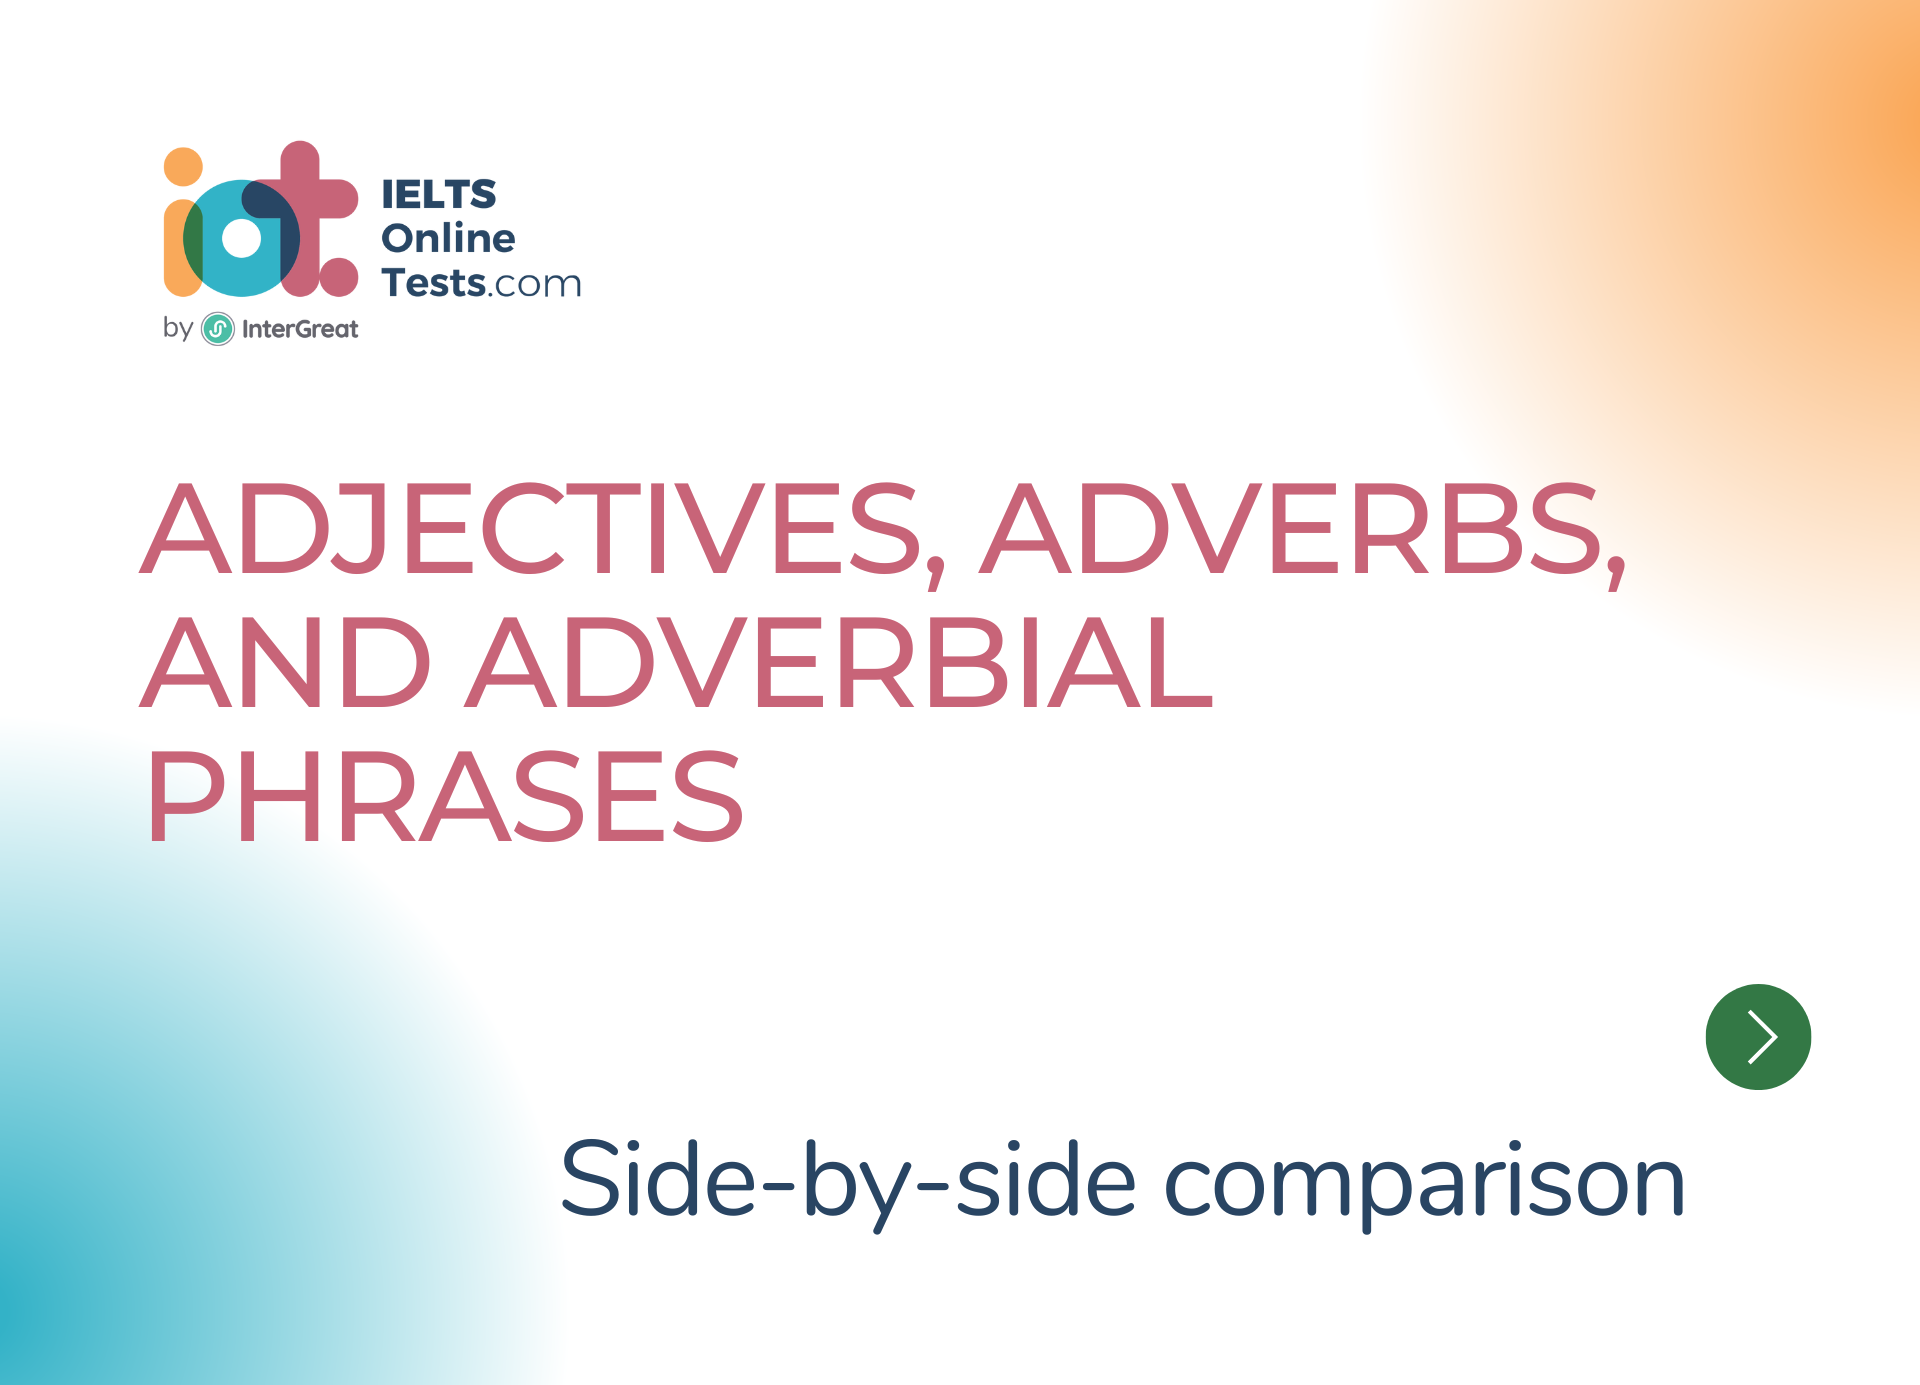 Adjectives, adverbs, and adverbial phrases side-by-side comparison